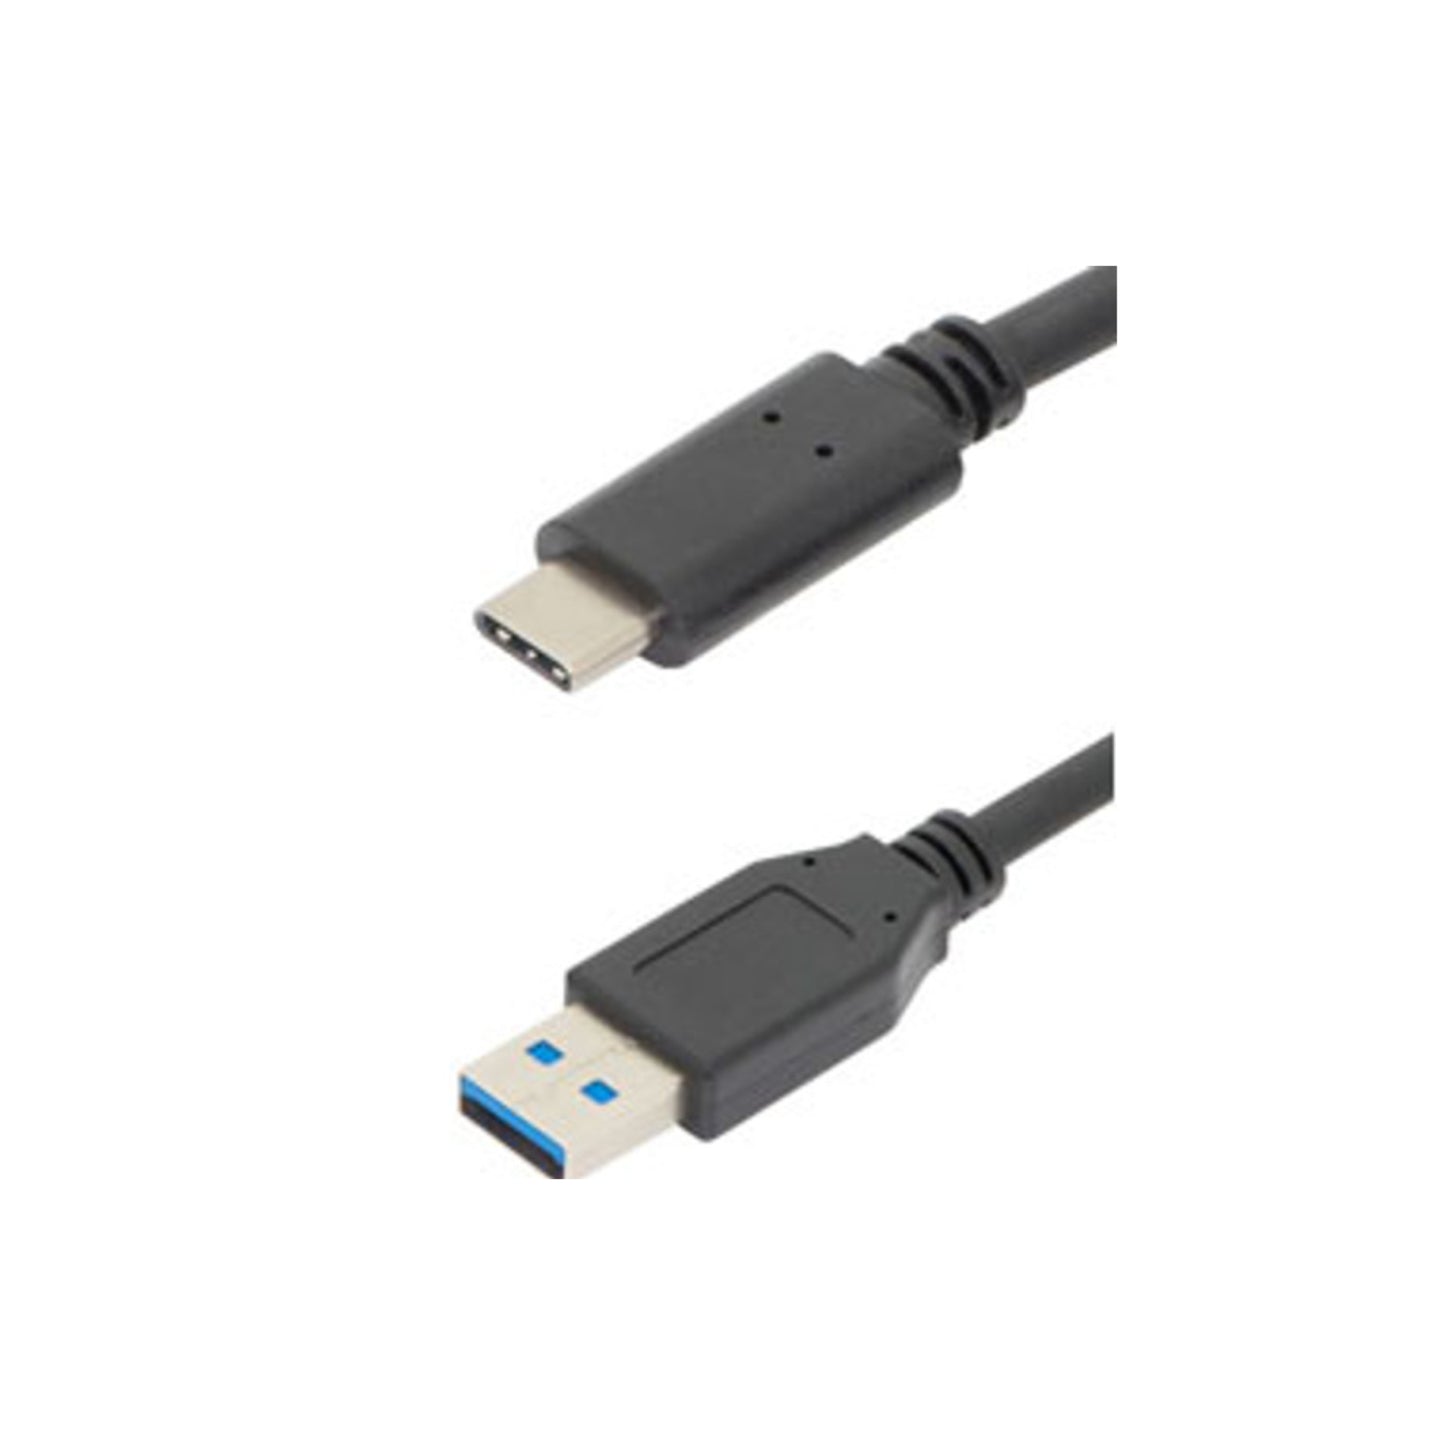 Buy Digitus USB Type-C (M) to USB Type A (M) 1m Gen2 10GBs Cable at Topic Store